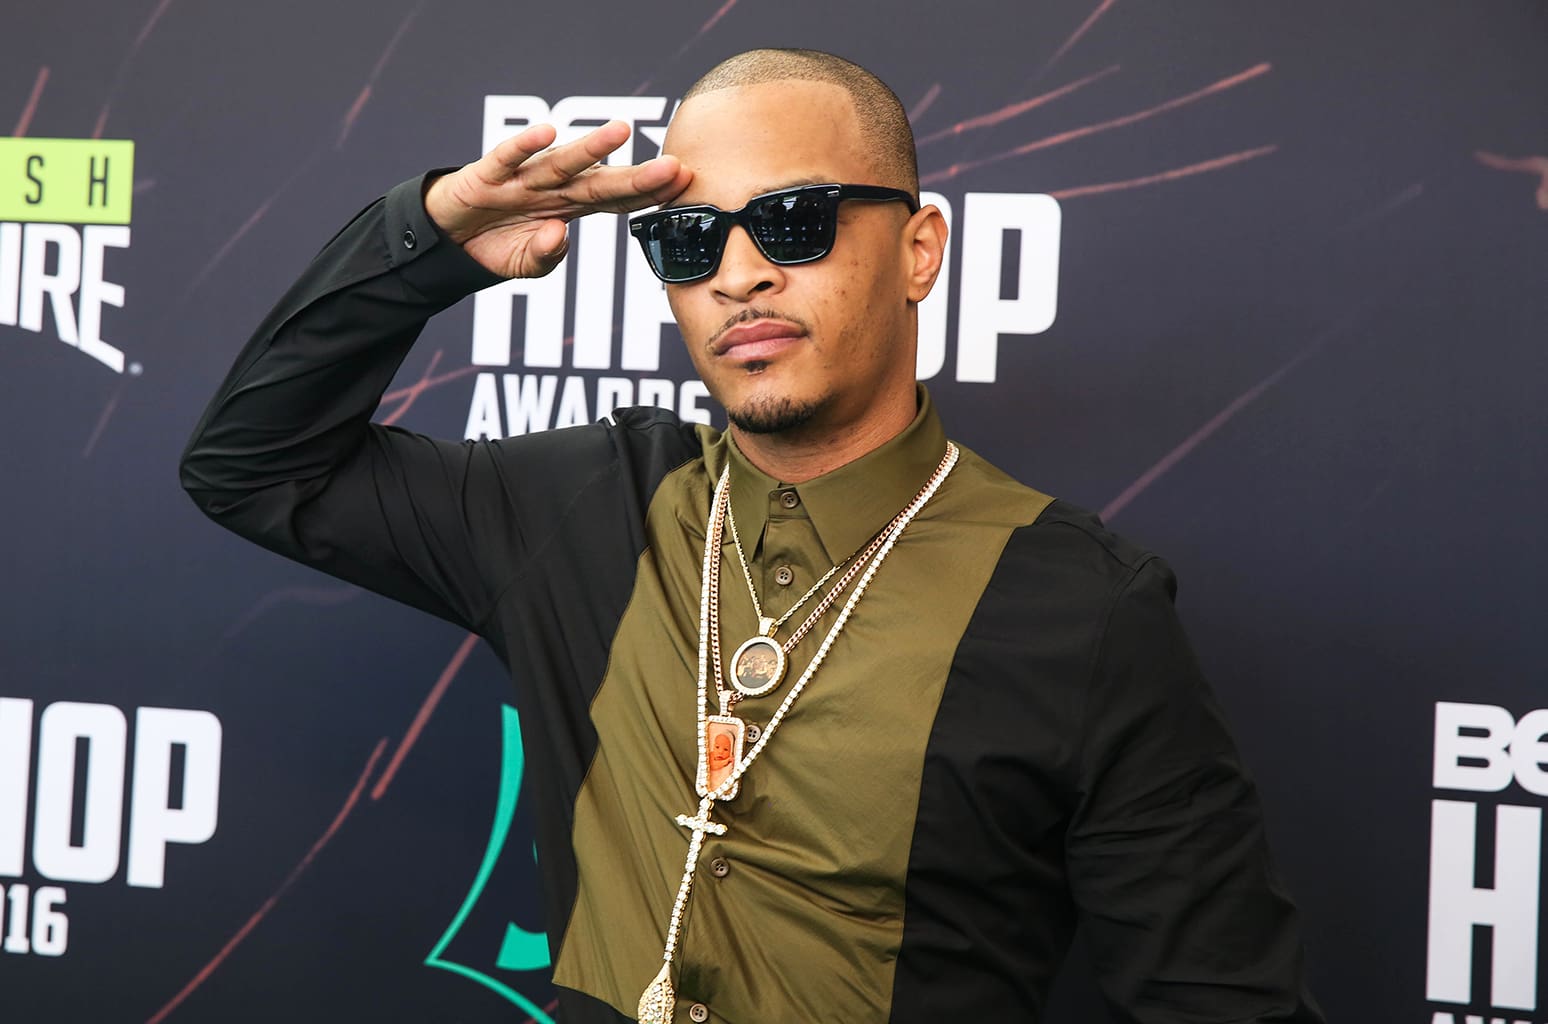 T.I. Helped Bail Out 23 Nonviolent Offenders On Easter - Phaedra Parks Praises The Rapper